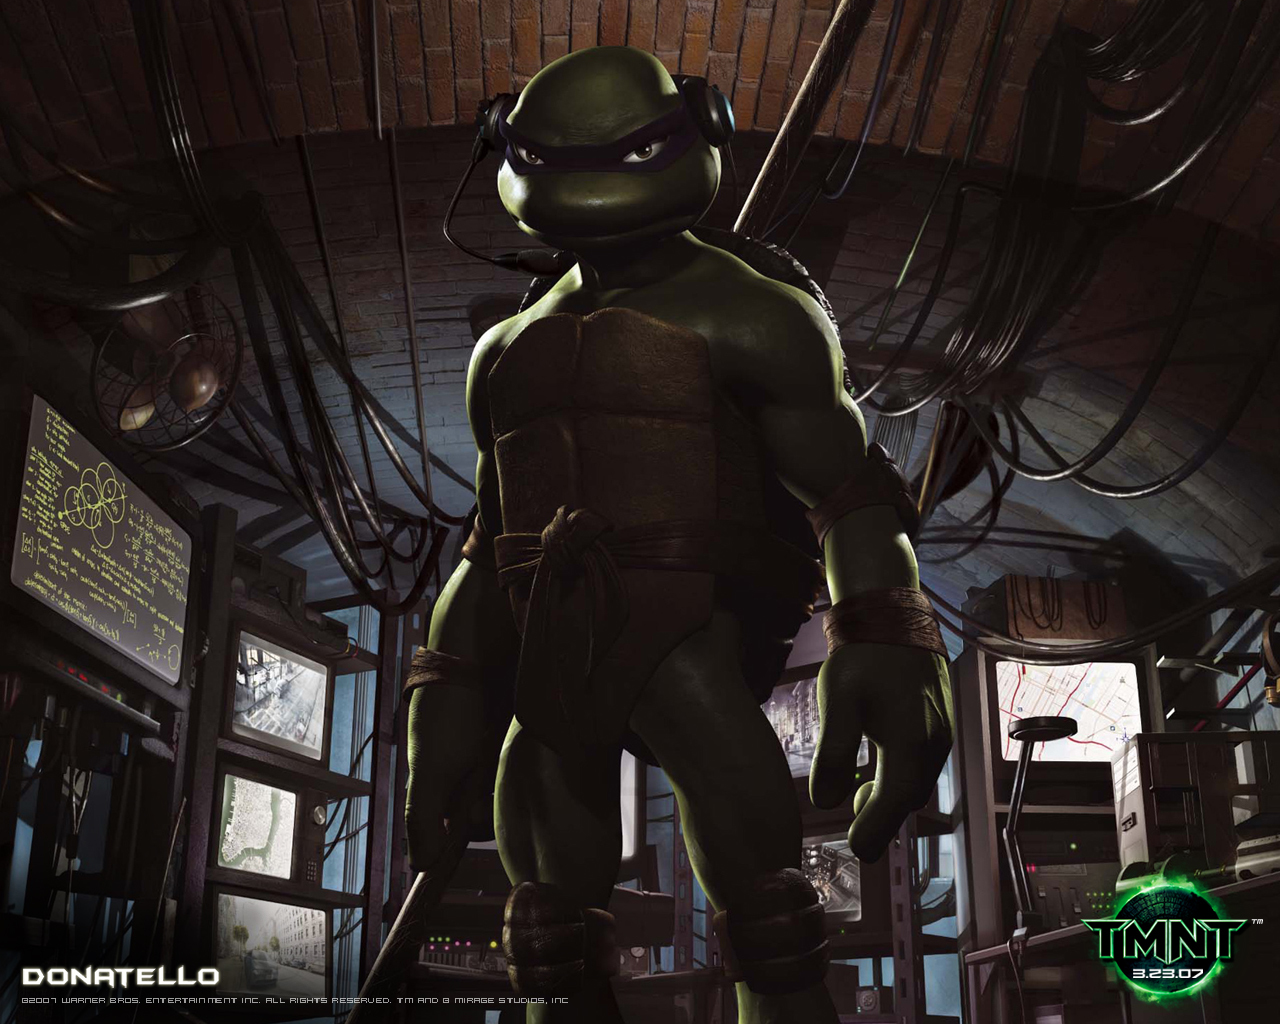 Popular Tmnt Image for Phone